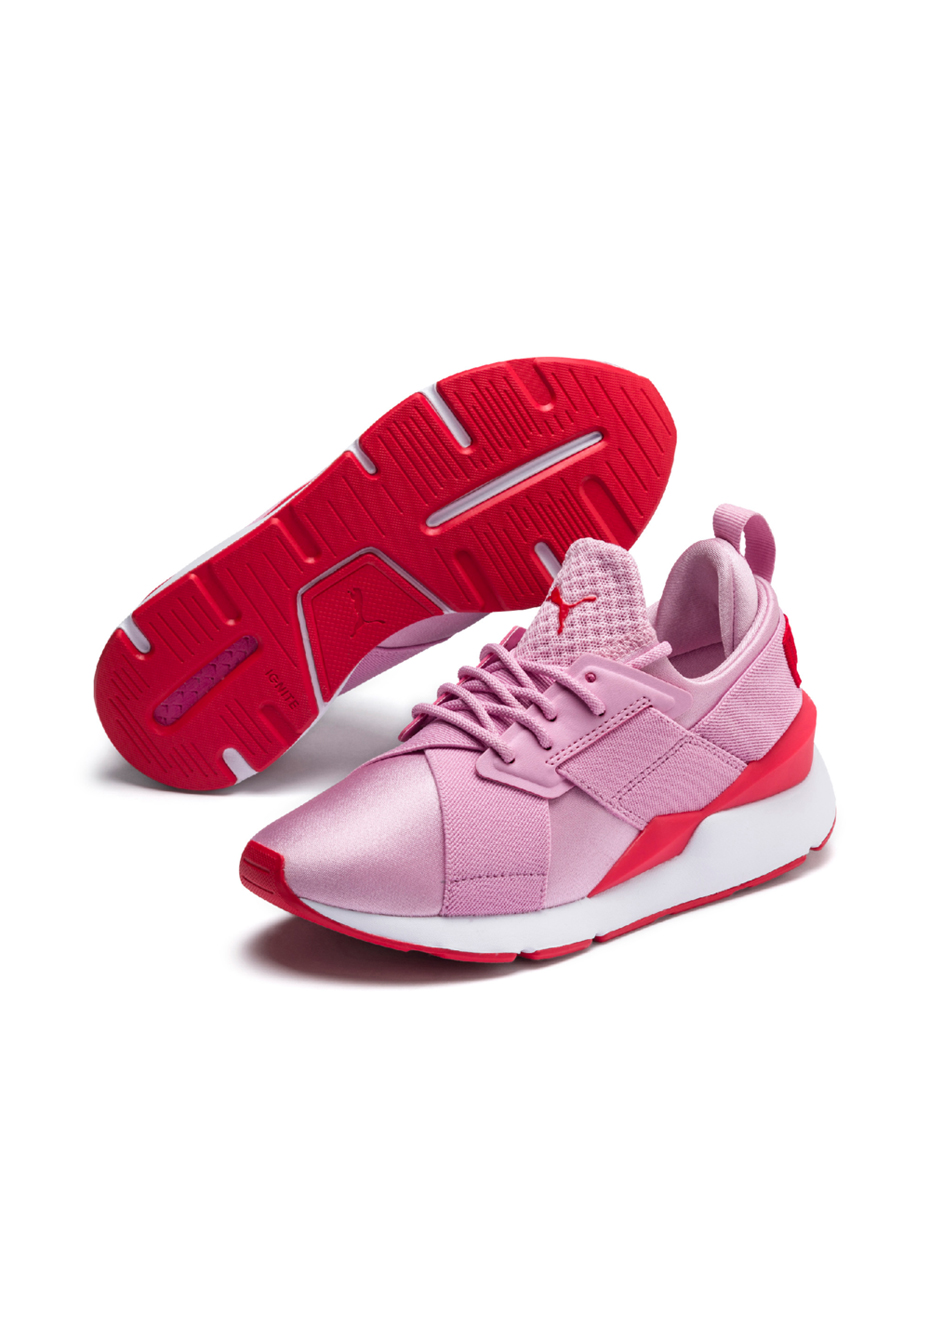 Puma - Kids Muse PS Pale Pink-Hibiscus 